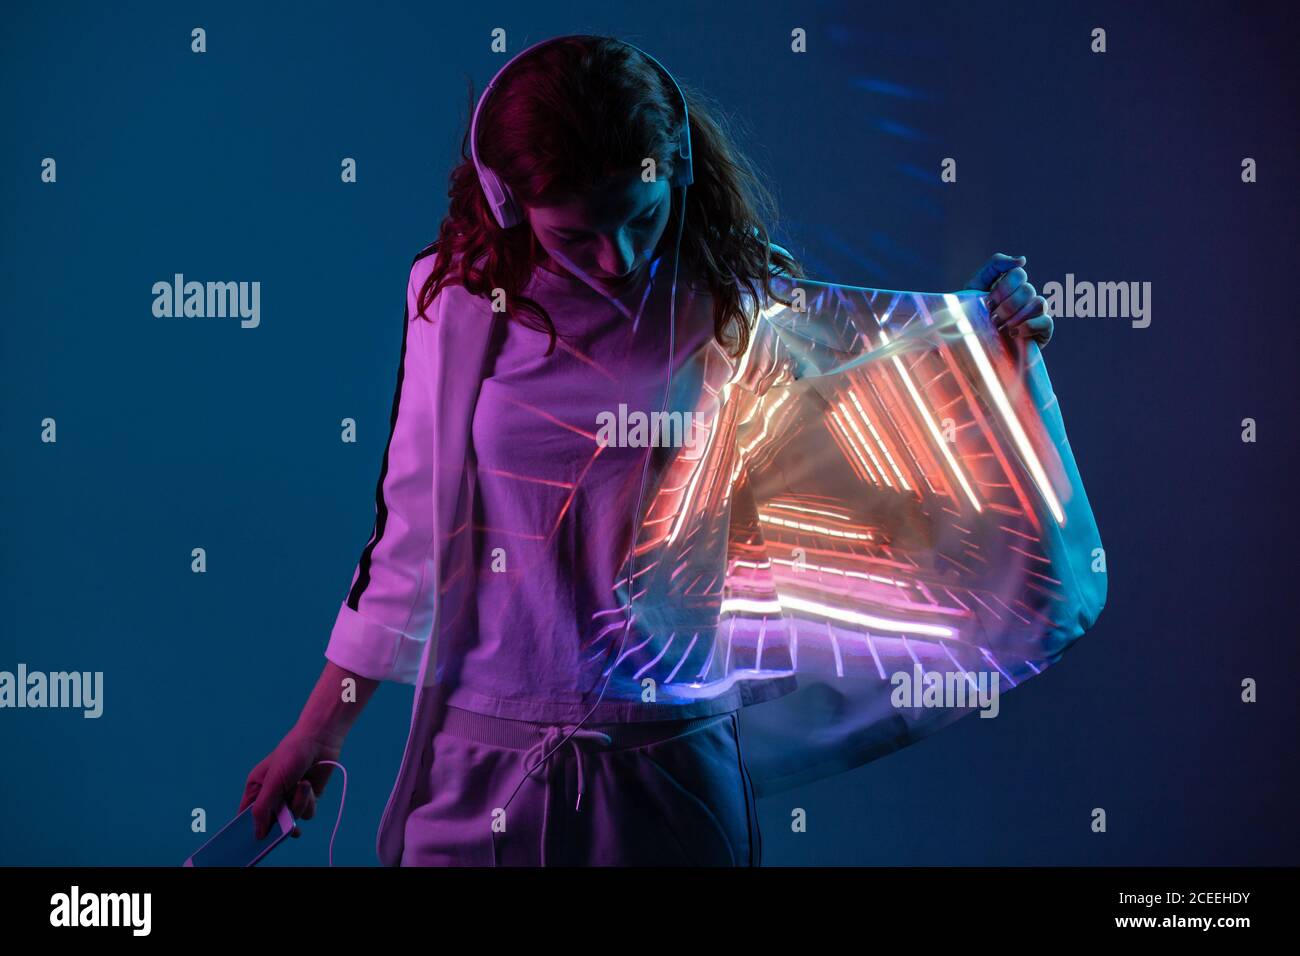 Young woman in headphones looking at neon light projection on blazer in studio Stock Photo